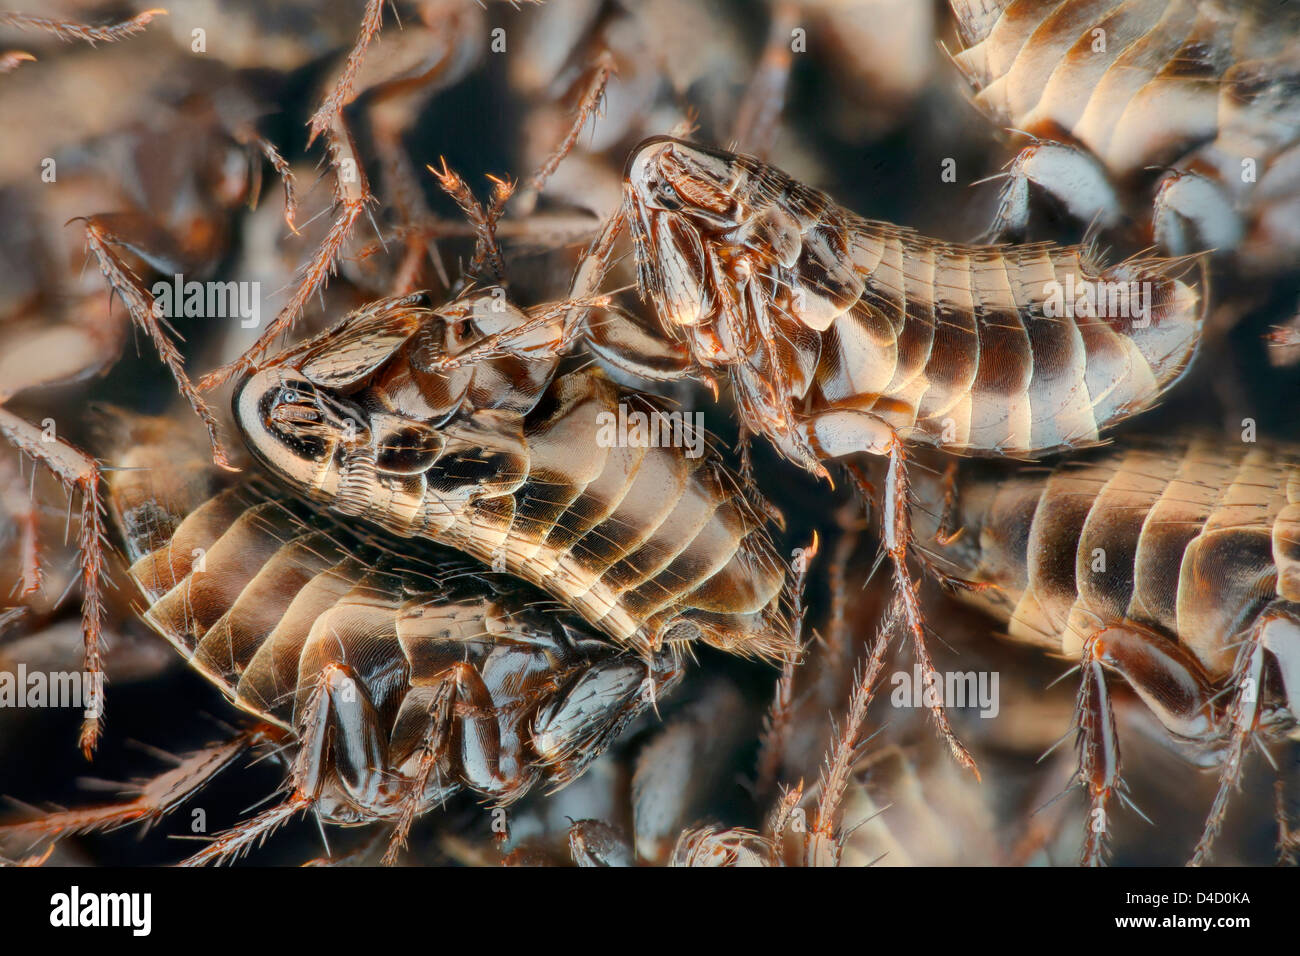 Heap of dead fleas, extreme close-up Stock Photo